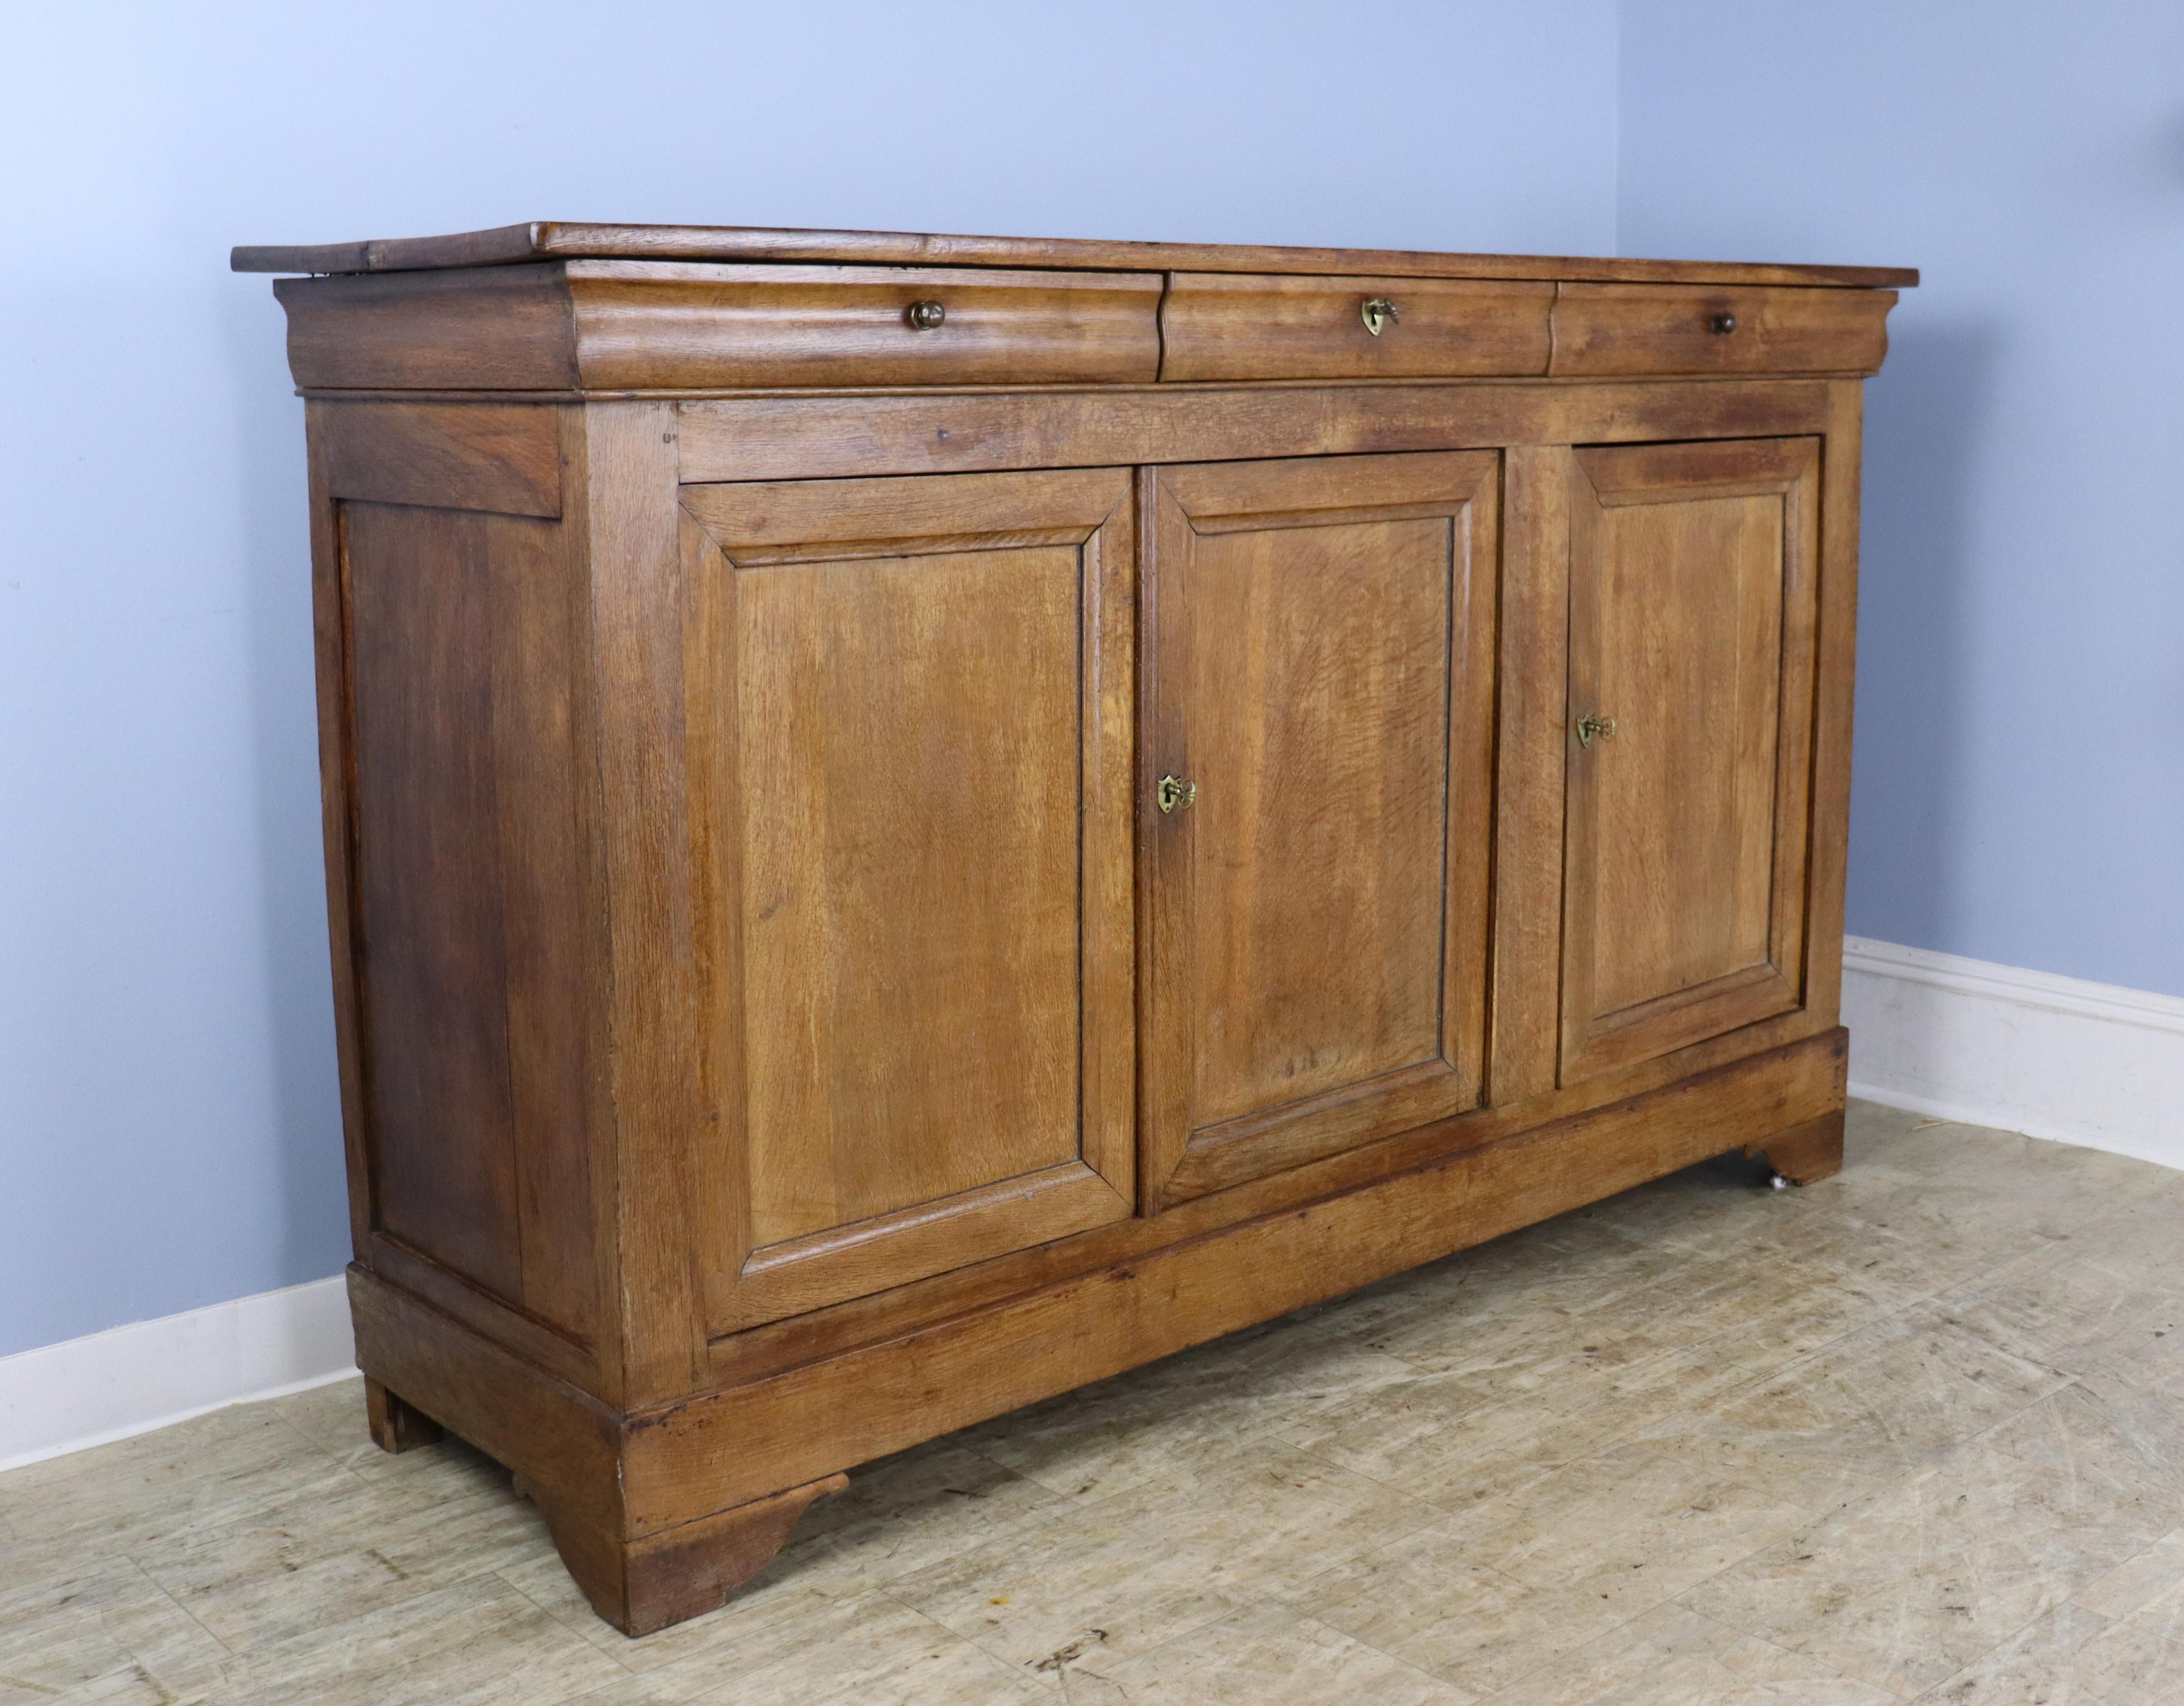 Very good, medium brown chestnut three-door enfilade, buffet or sideboard with beautiful grain highlighted by well colored inset panels on the doors. Glorious glow and patina. Nice stylized feet. The brass hardware original and fullof character. 